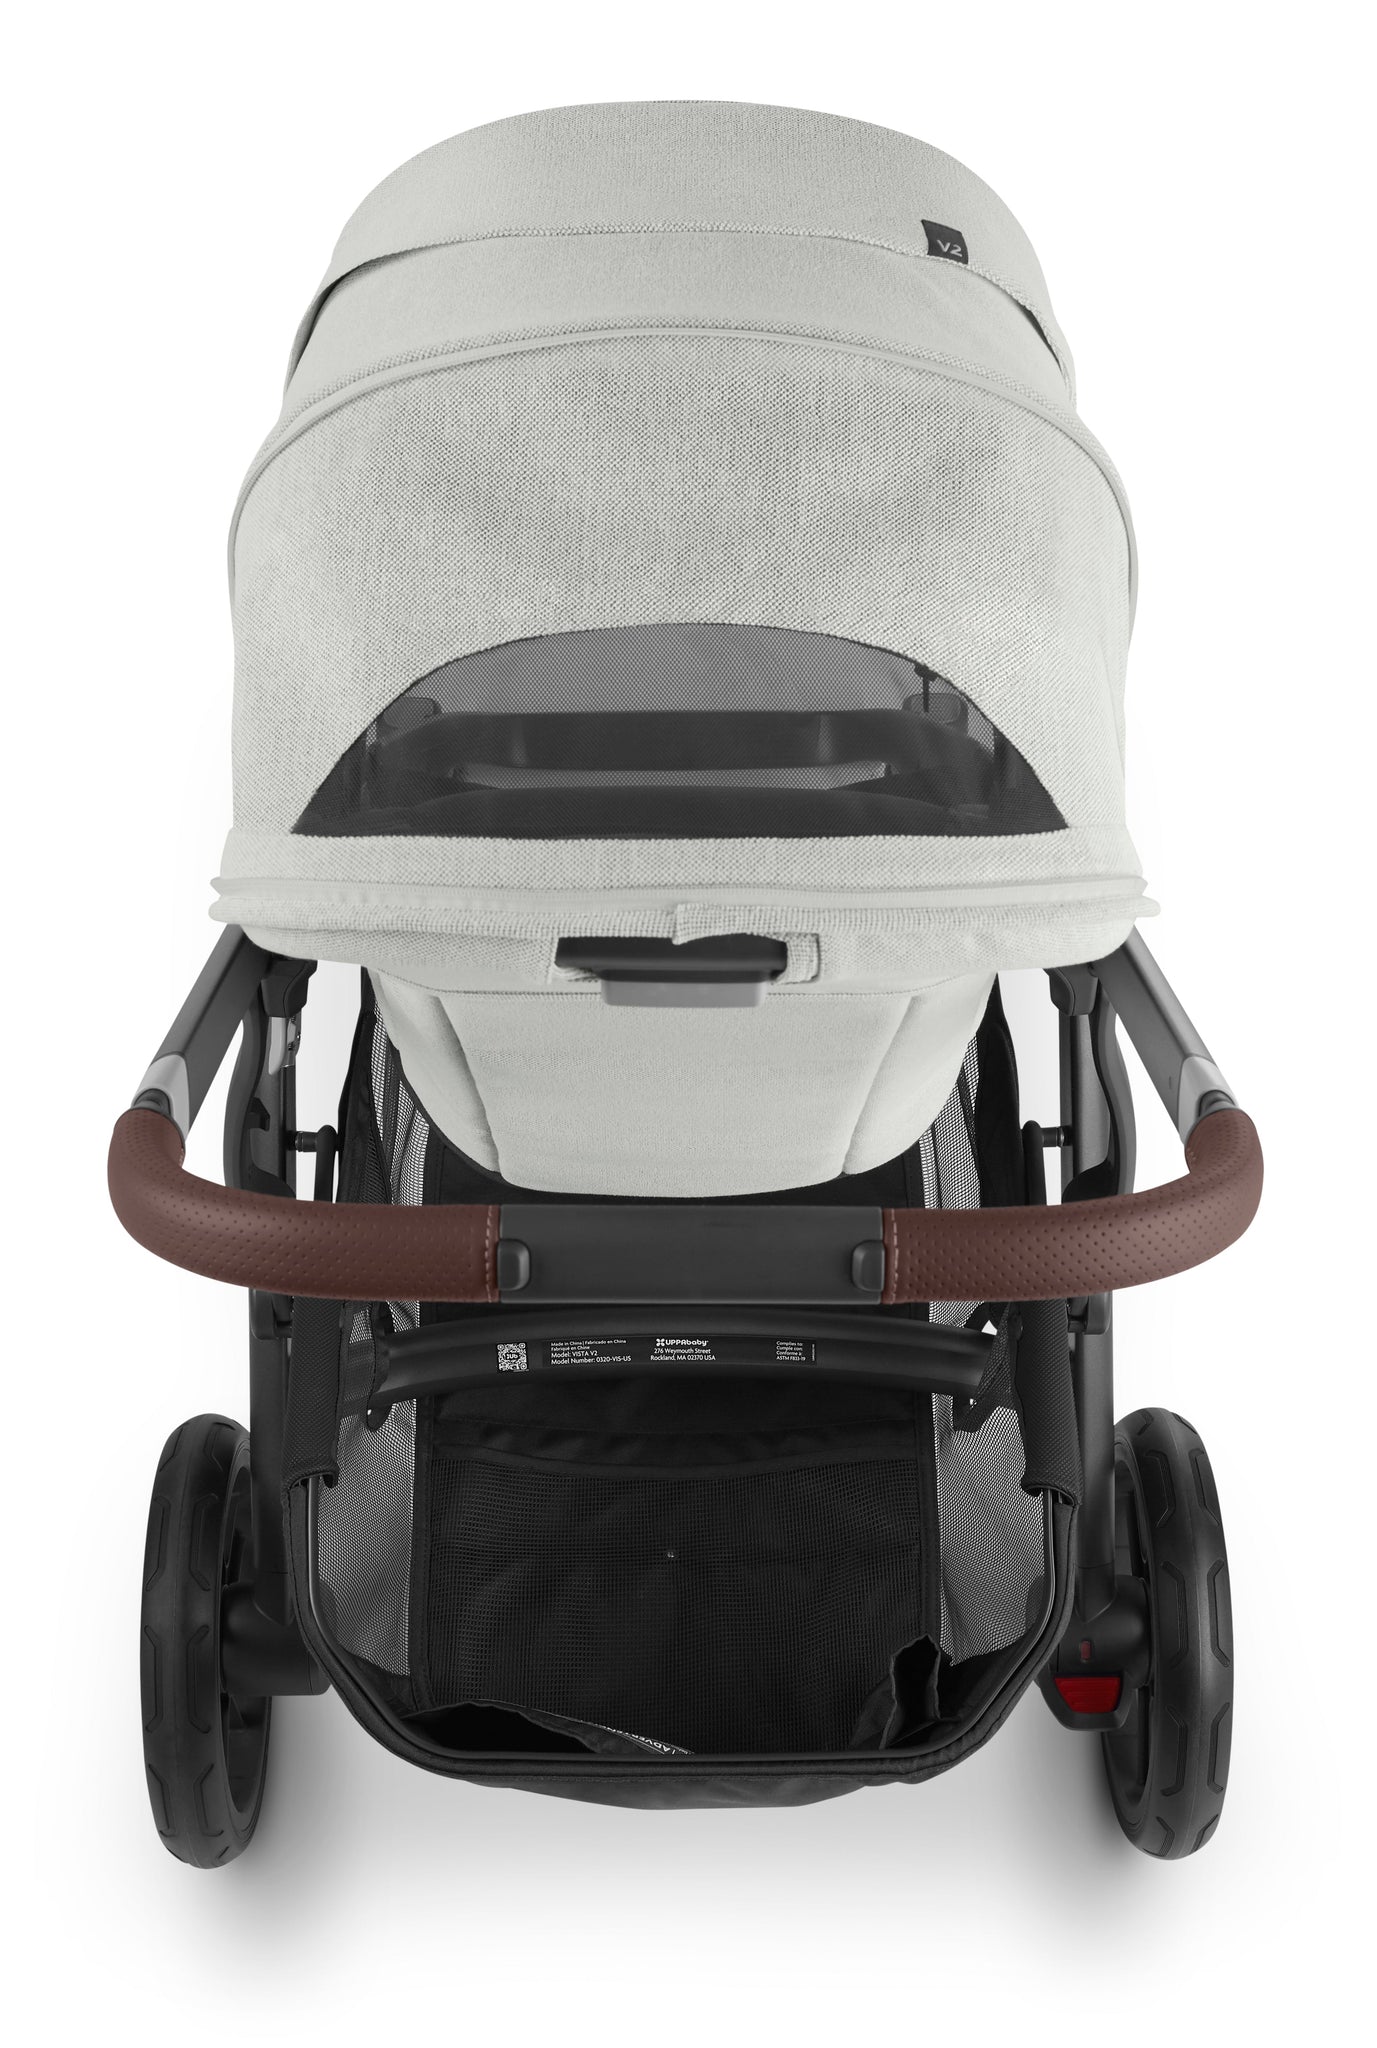 (Open Box - NEW) UPPAbaby Vista V2 Stroller - Anthony (White and Grey Chenille/Carbon/Chestnut Leather)